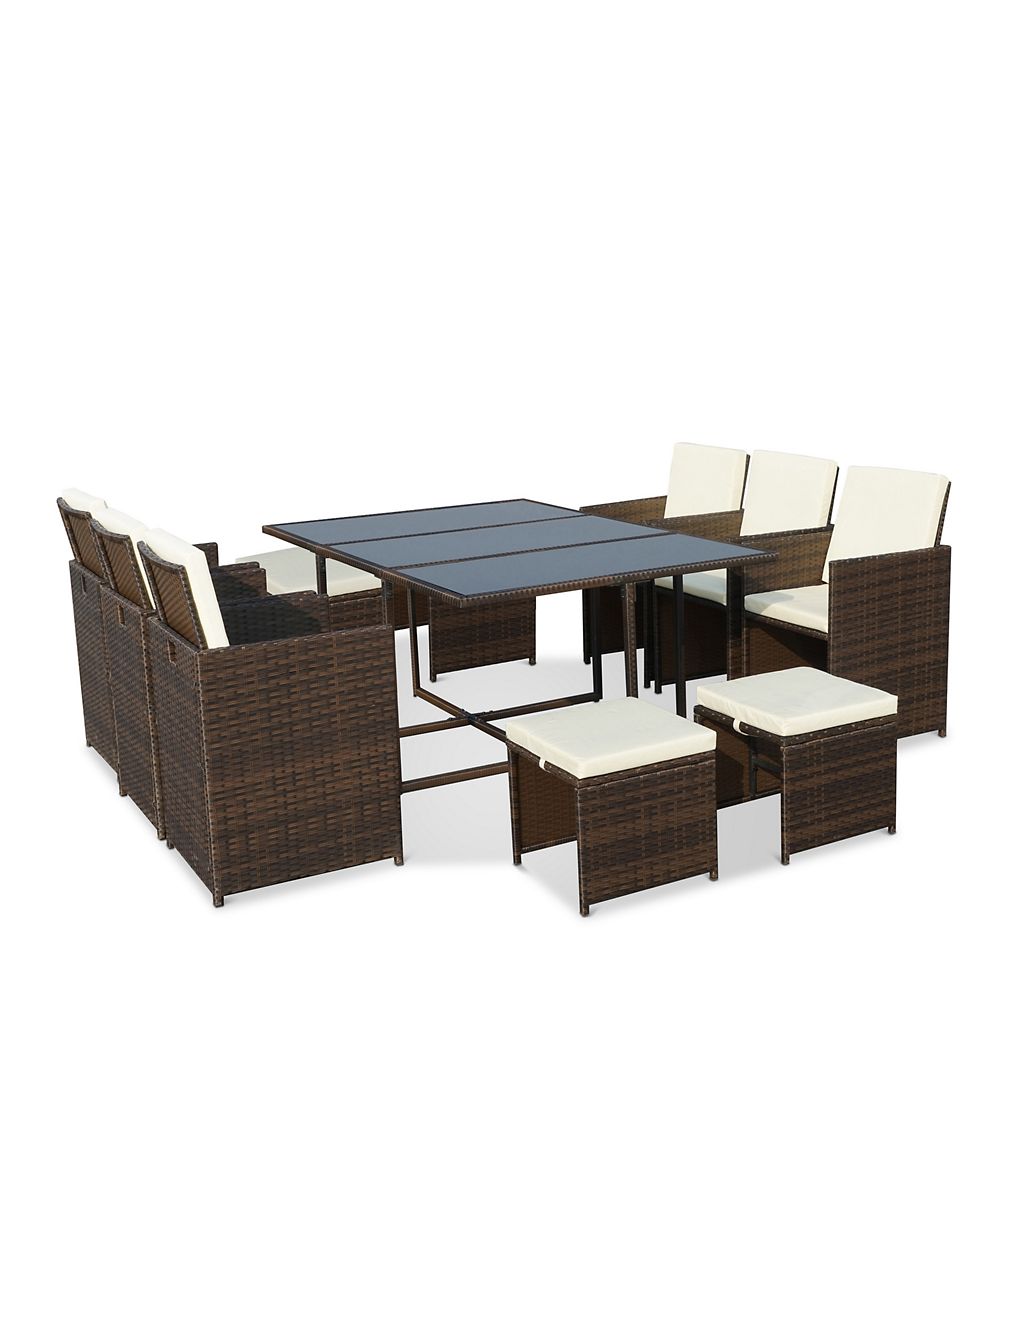 Cannes 10 Seater Rattan Garden Cube Dining Set 5 of 5